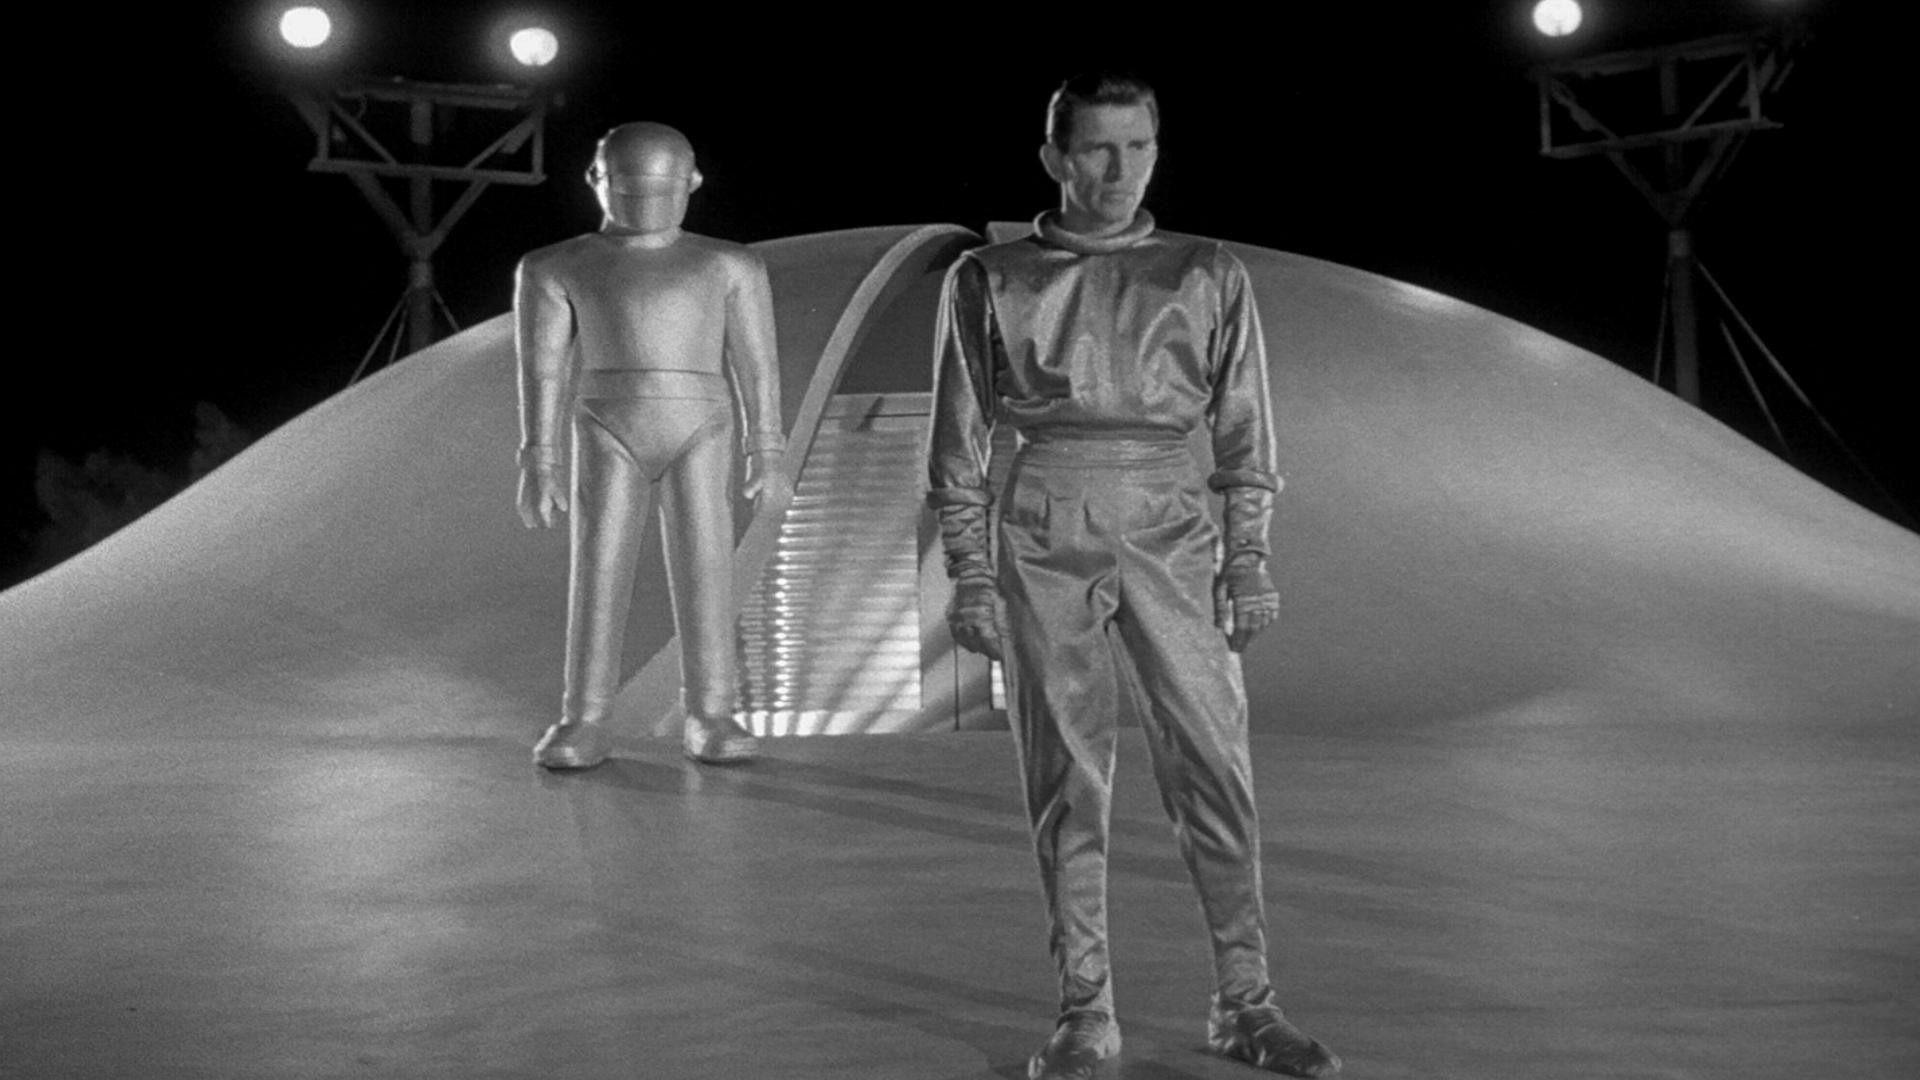 Free Images  The Day The Earth Stood Still (1951)